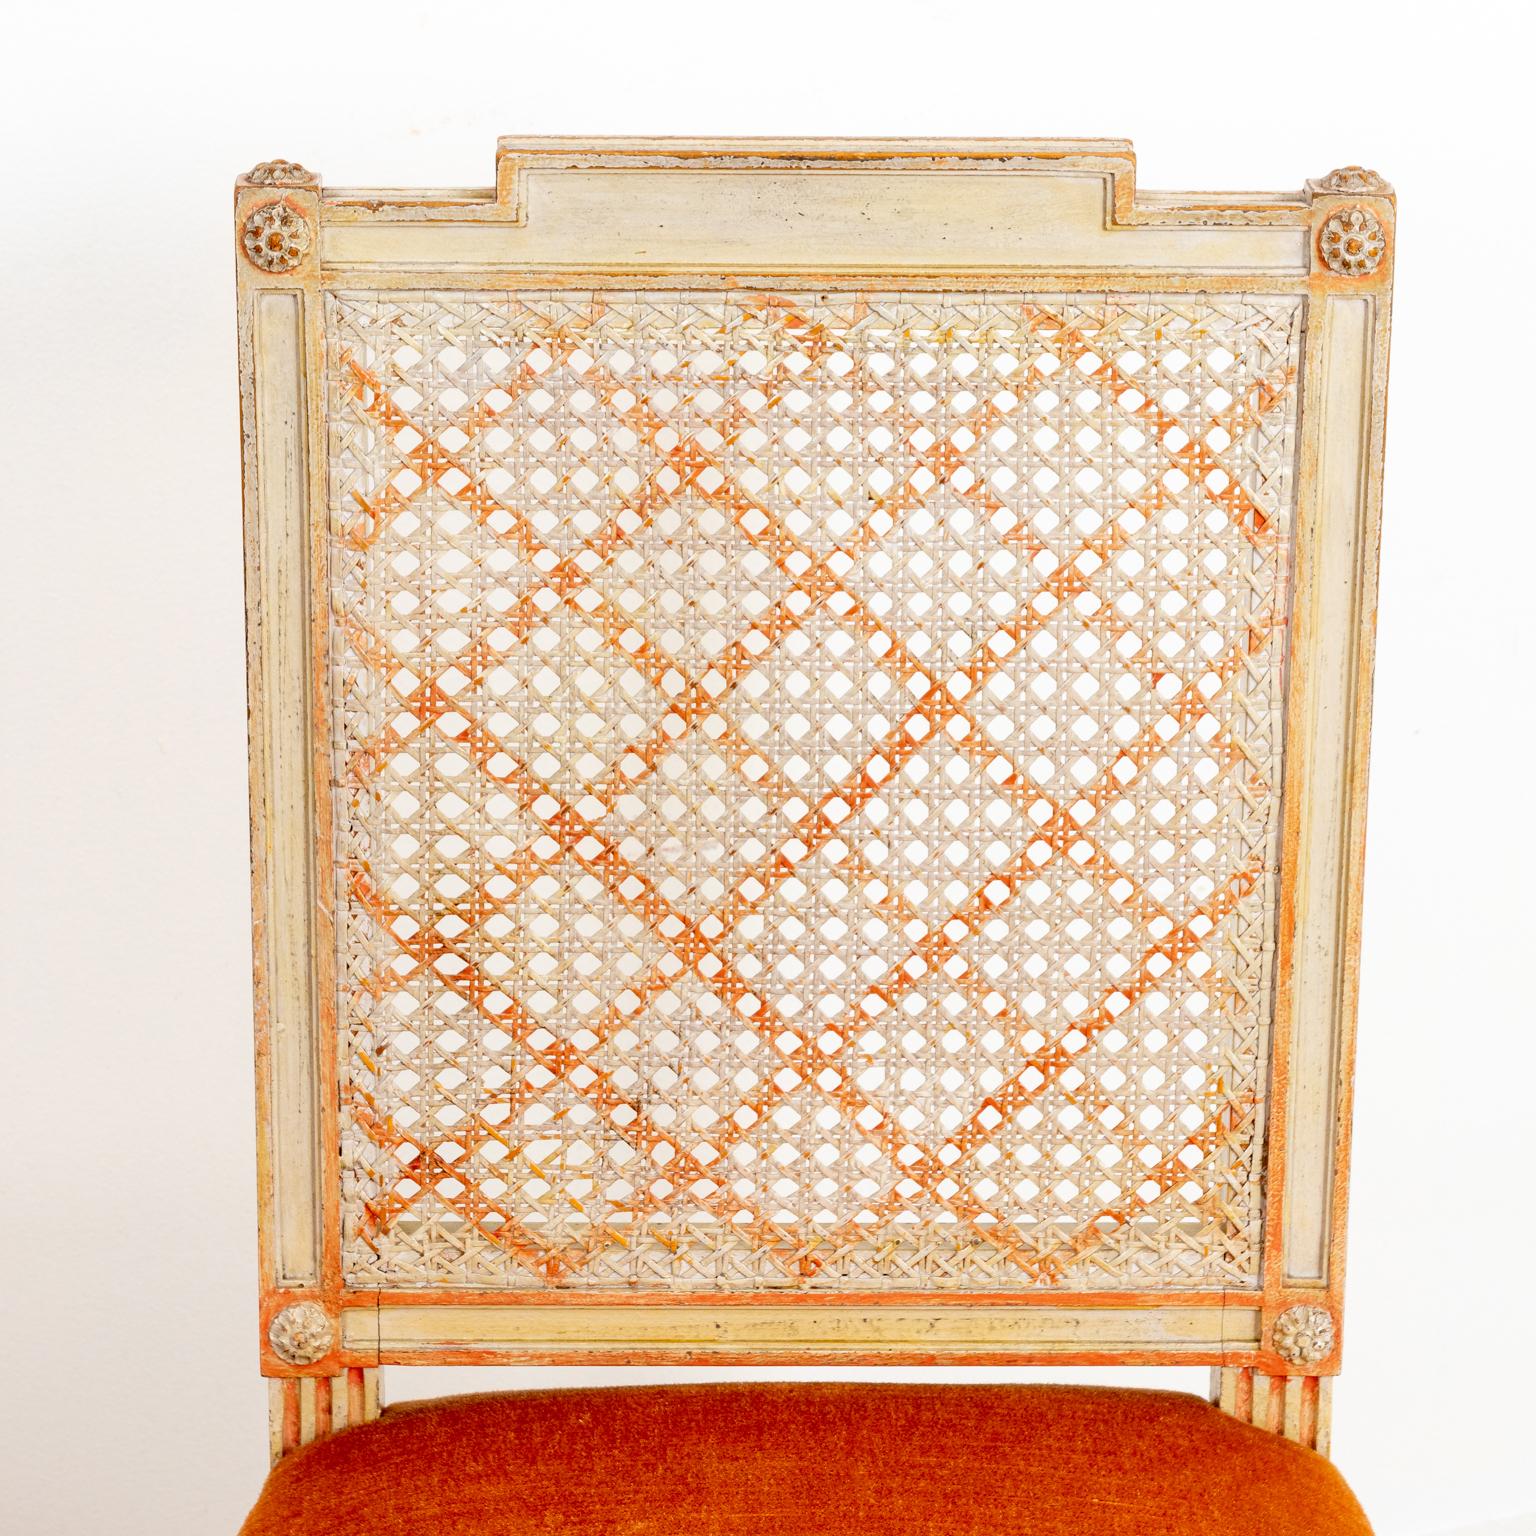 Set of four caned and painted side chairs with latticework on the rectangular seat back and metal nail head trim. The piece also features upholstered seats and fluted, turned legs. Please note of wear consistent with age including minor paint loss